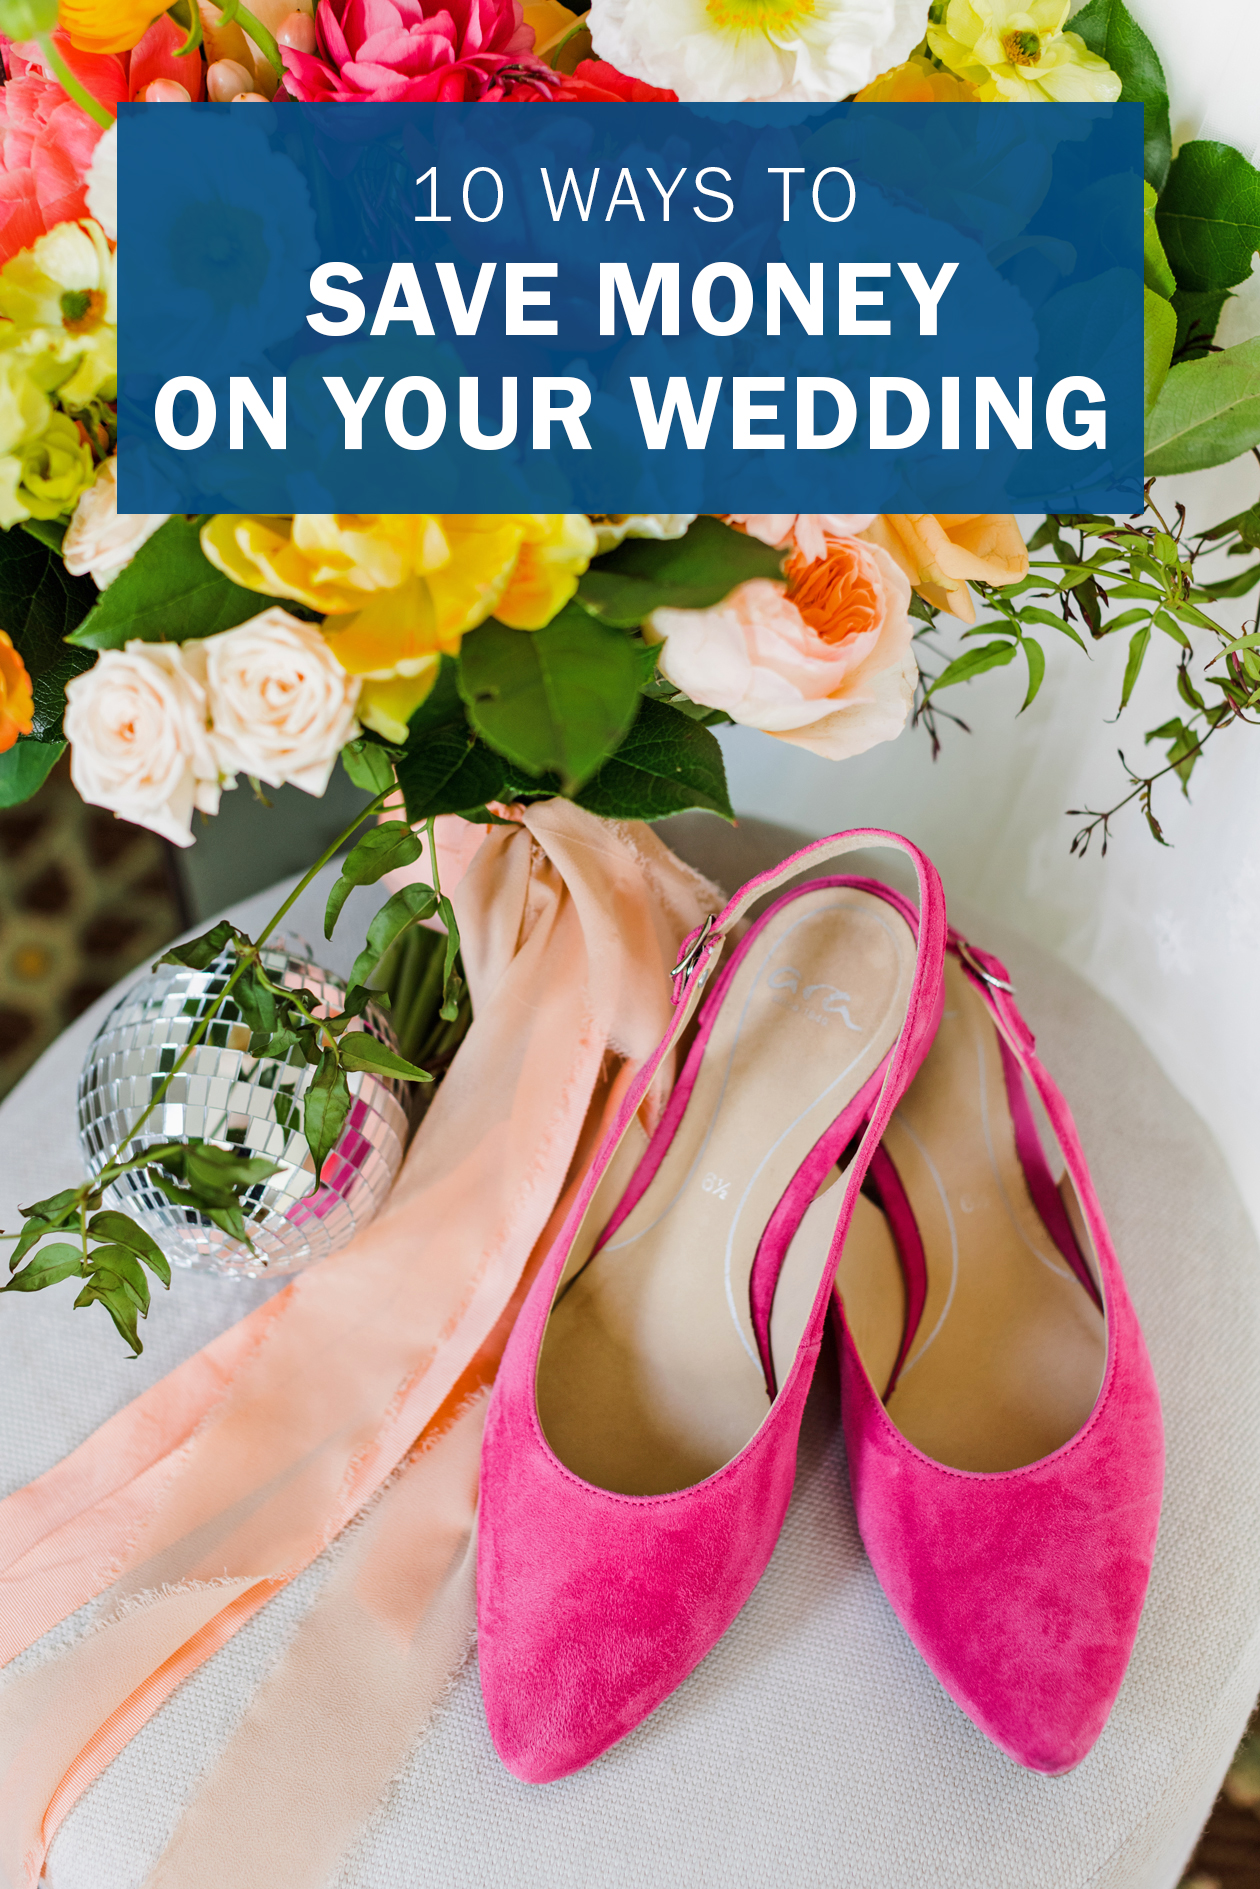 10 Ways to Save Money on Your Wedding